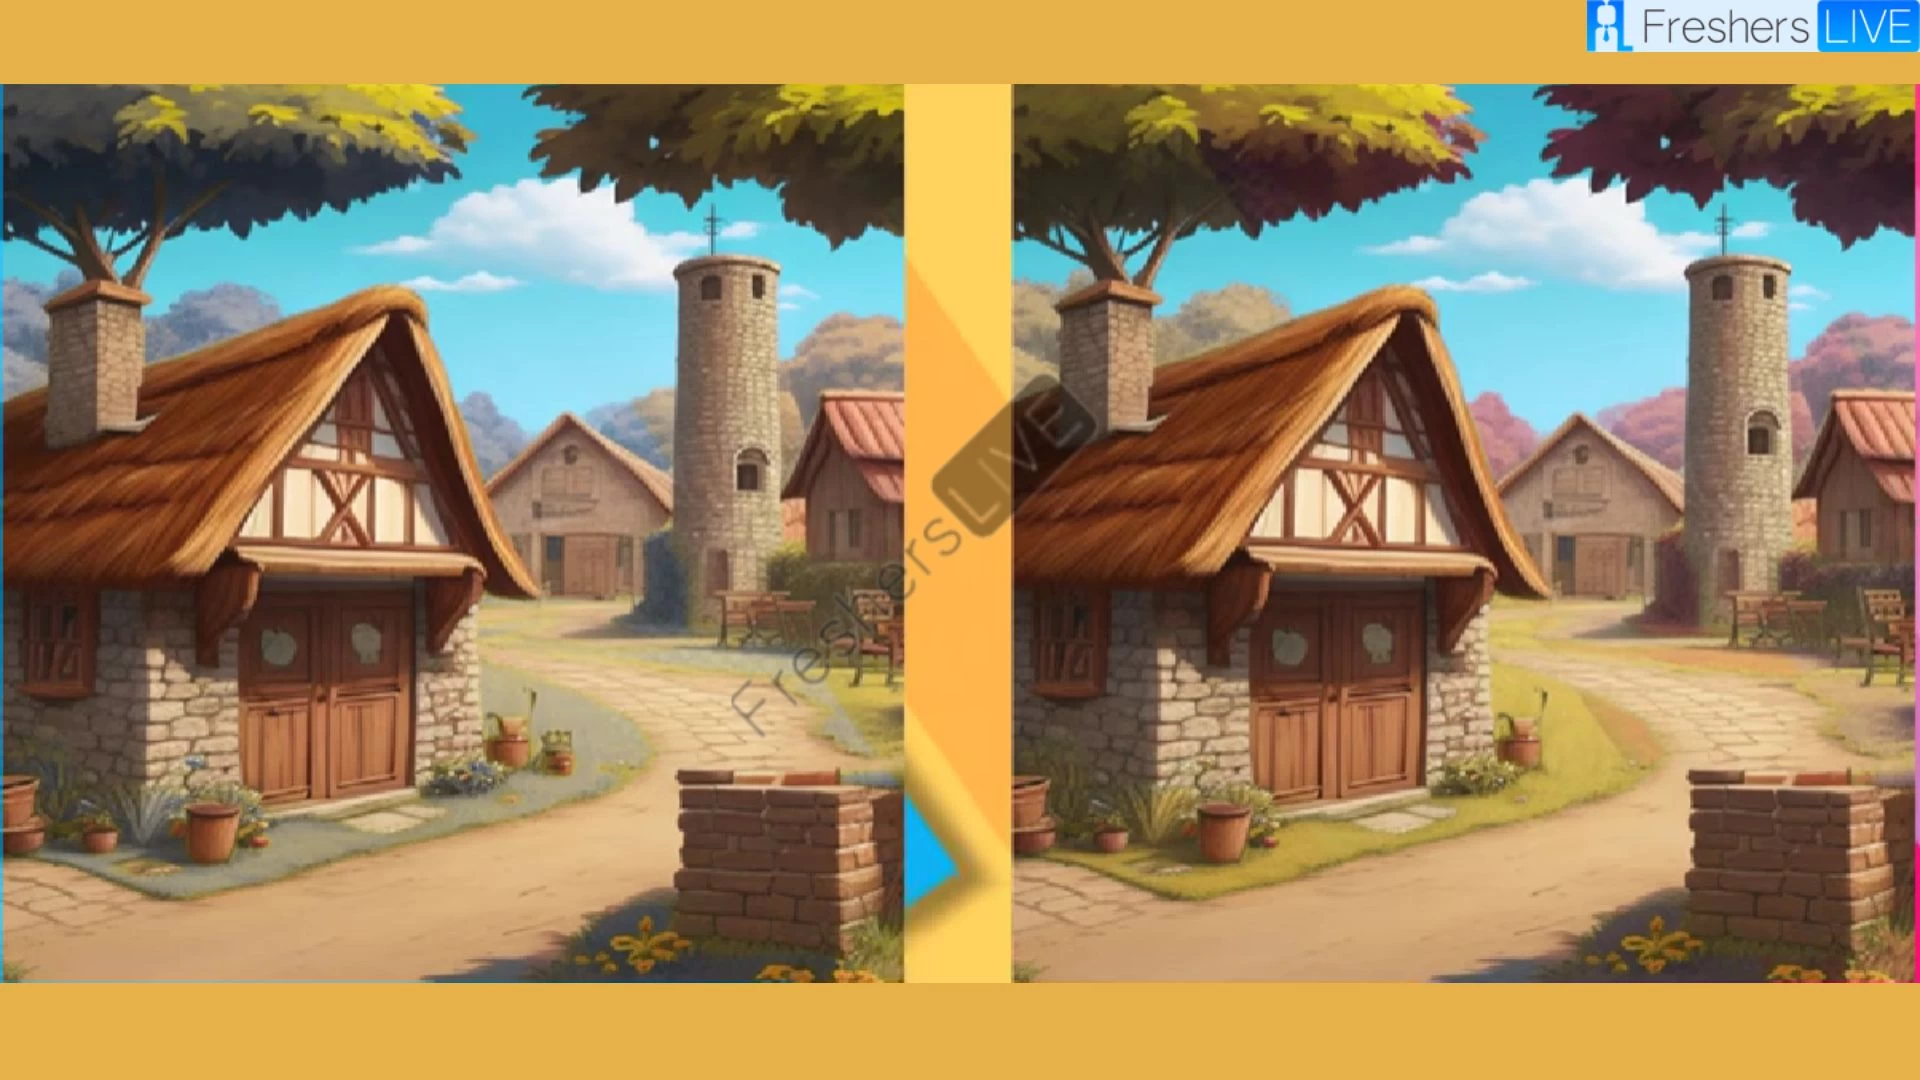 Can you quickly identify 3 differences in the House pictures?